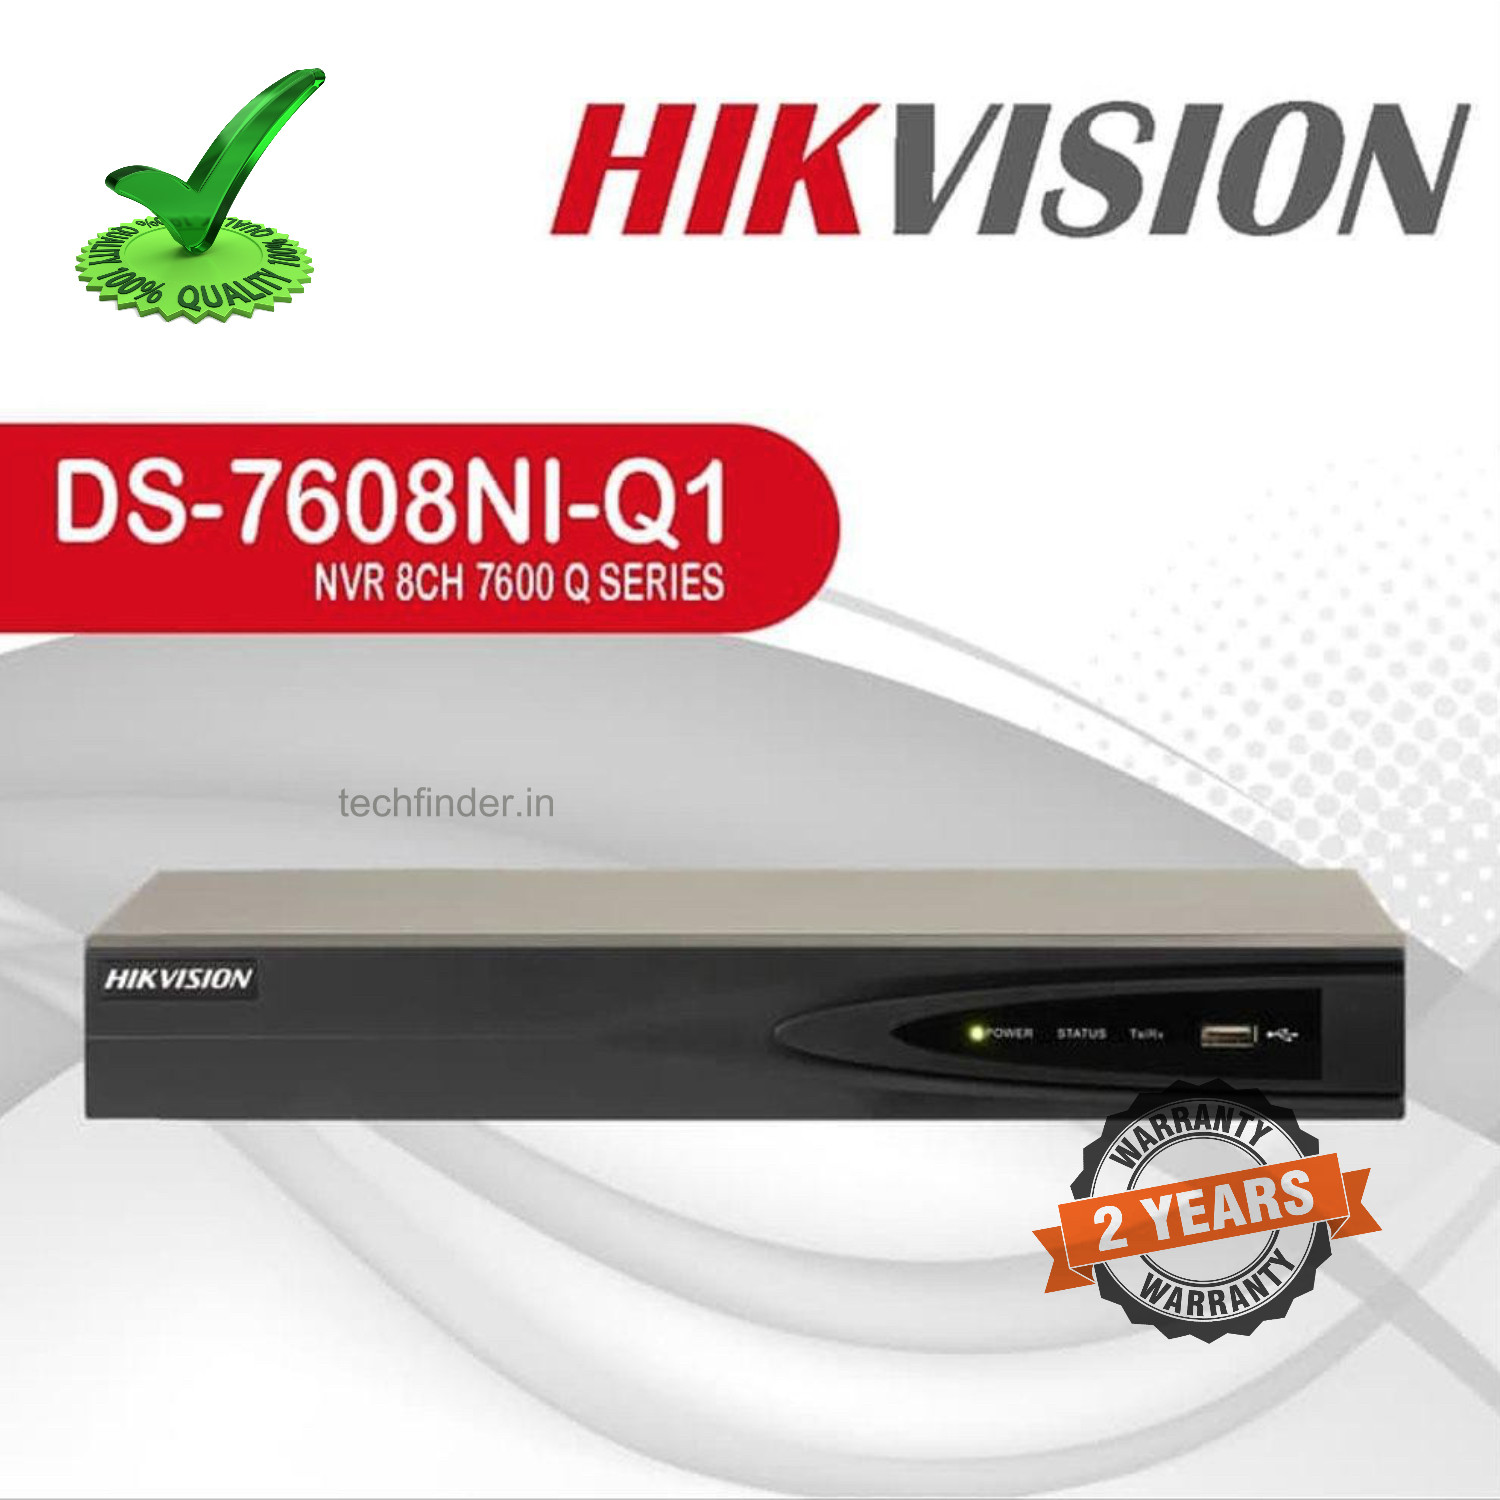 Hikvision DS-7608NI-Q1 Series 8ch 4k Nvr